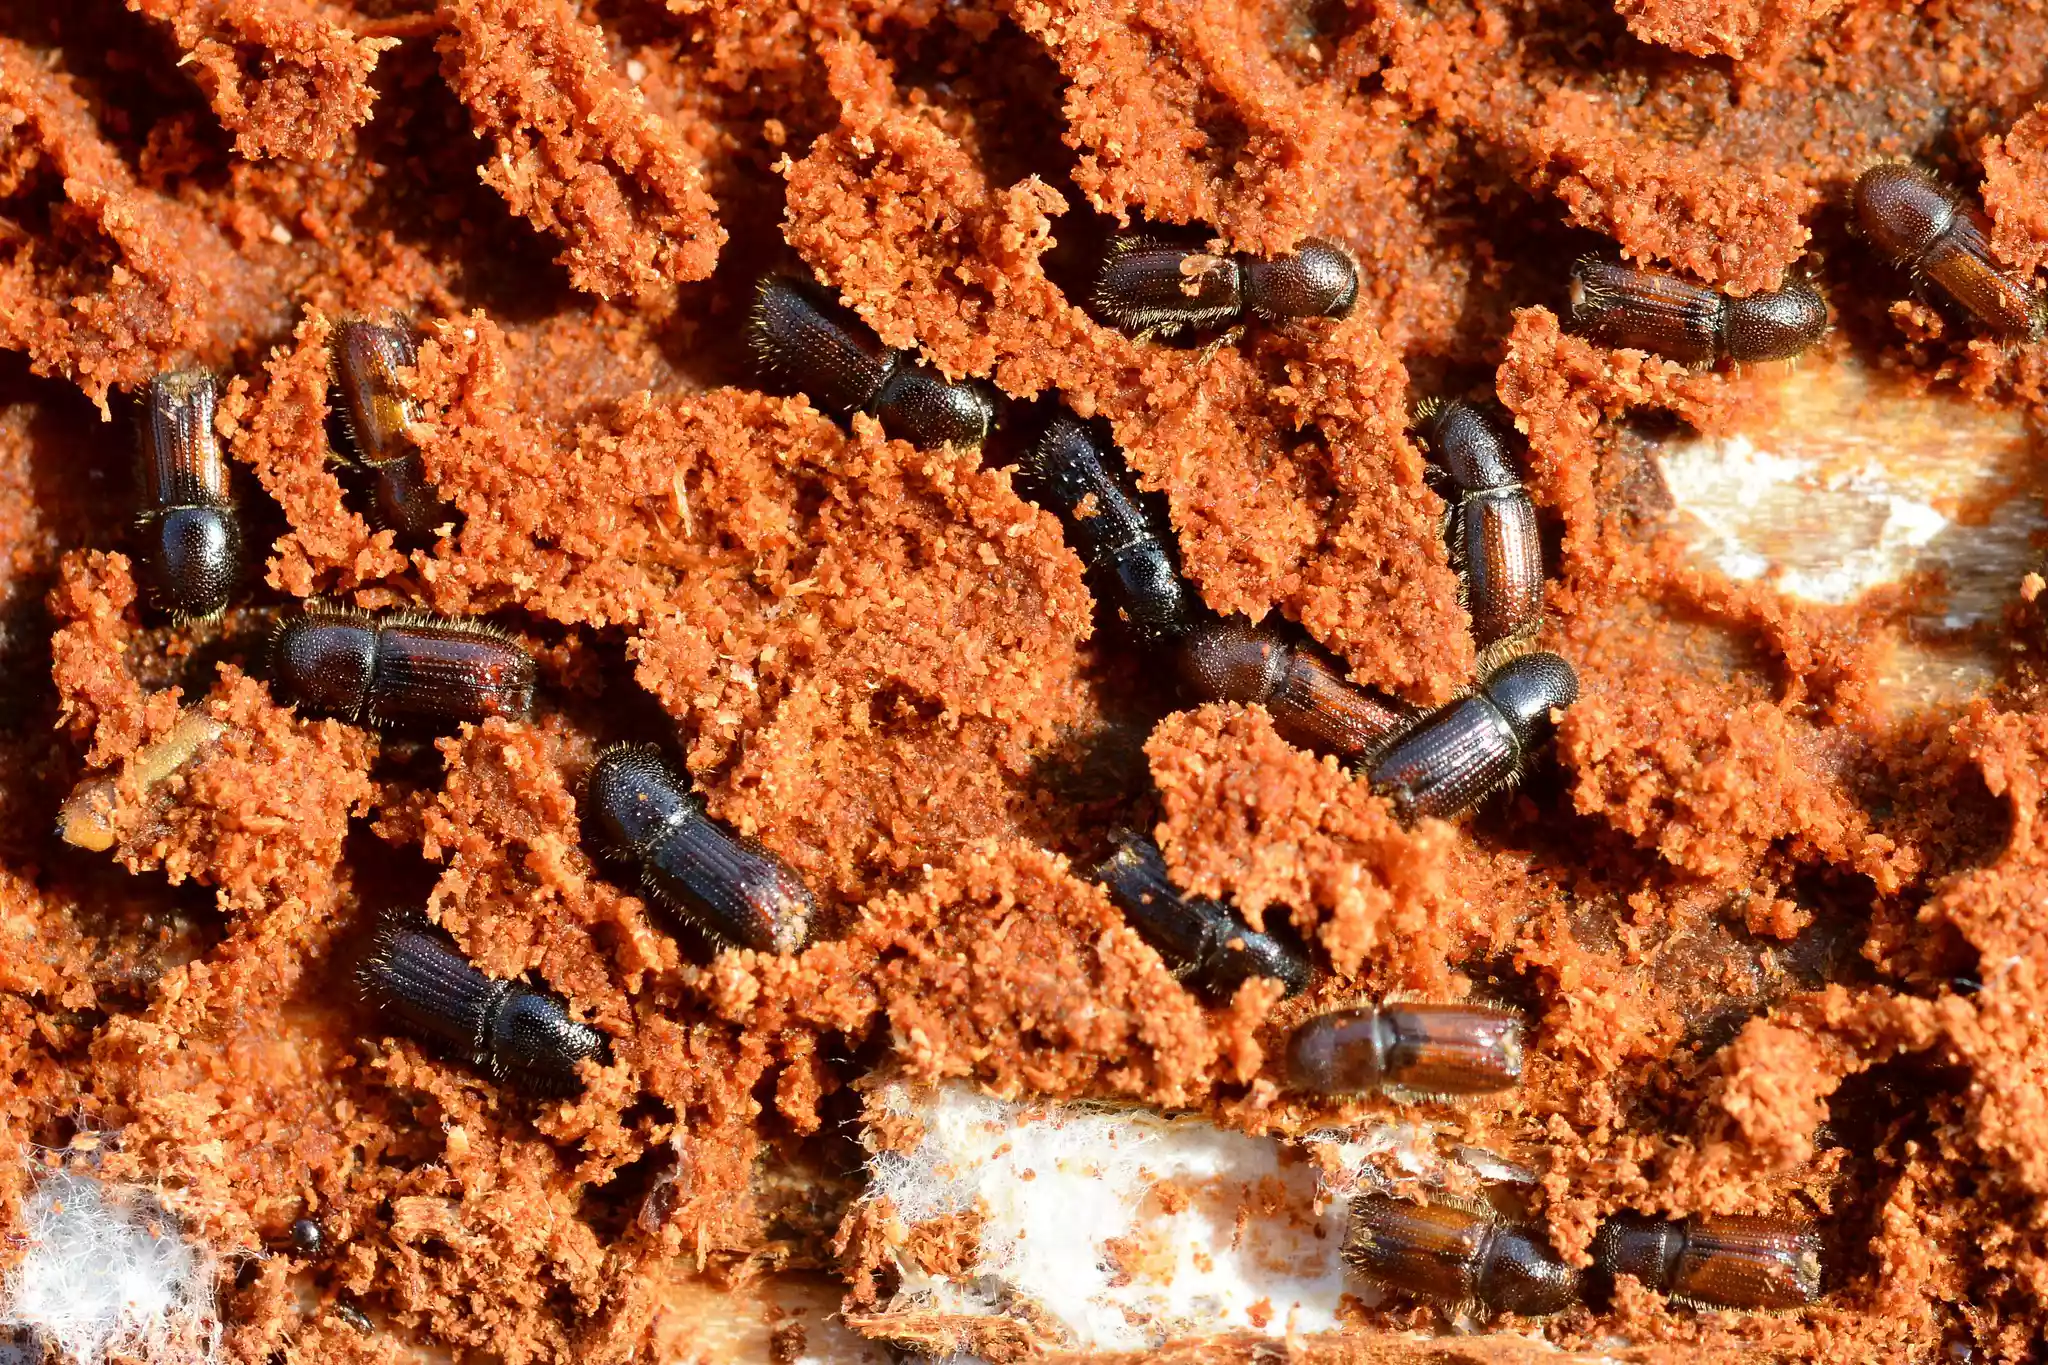 lesser larch bark beetles and their galleries under the bark of a black pine tree